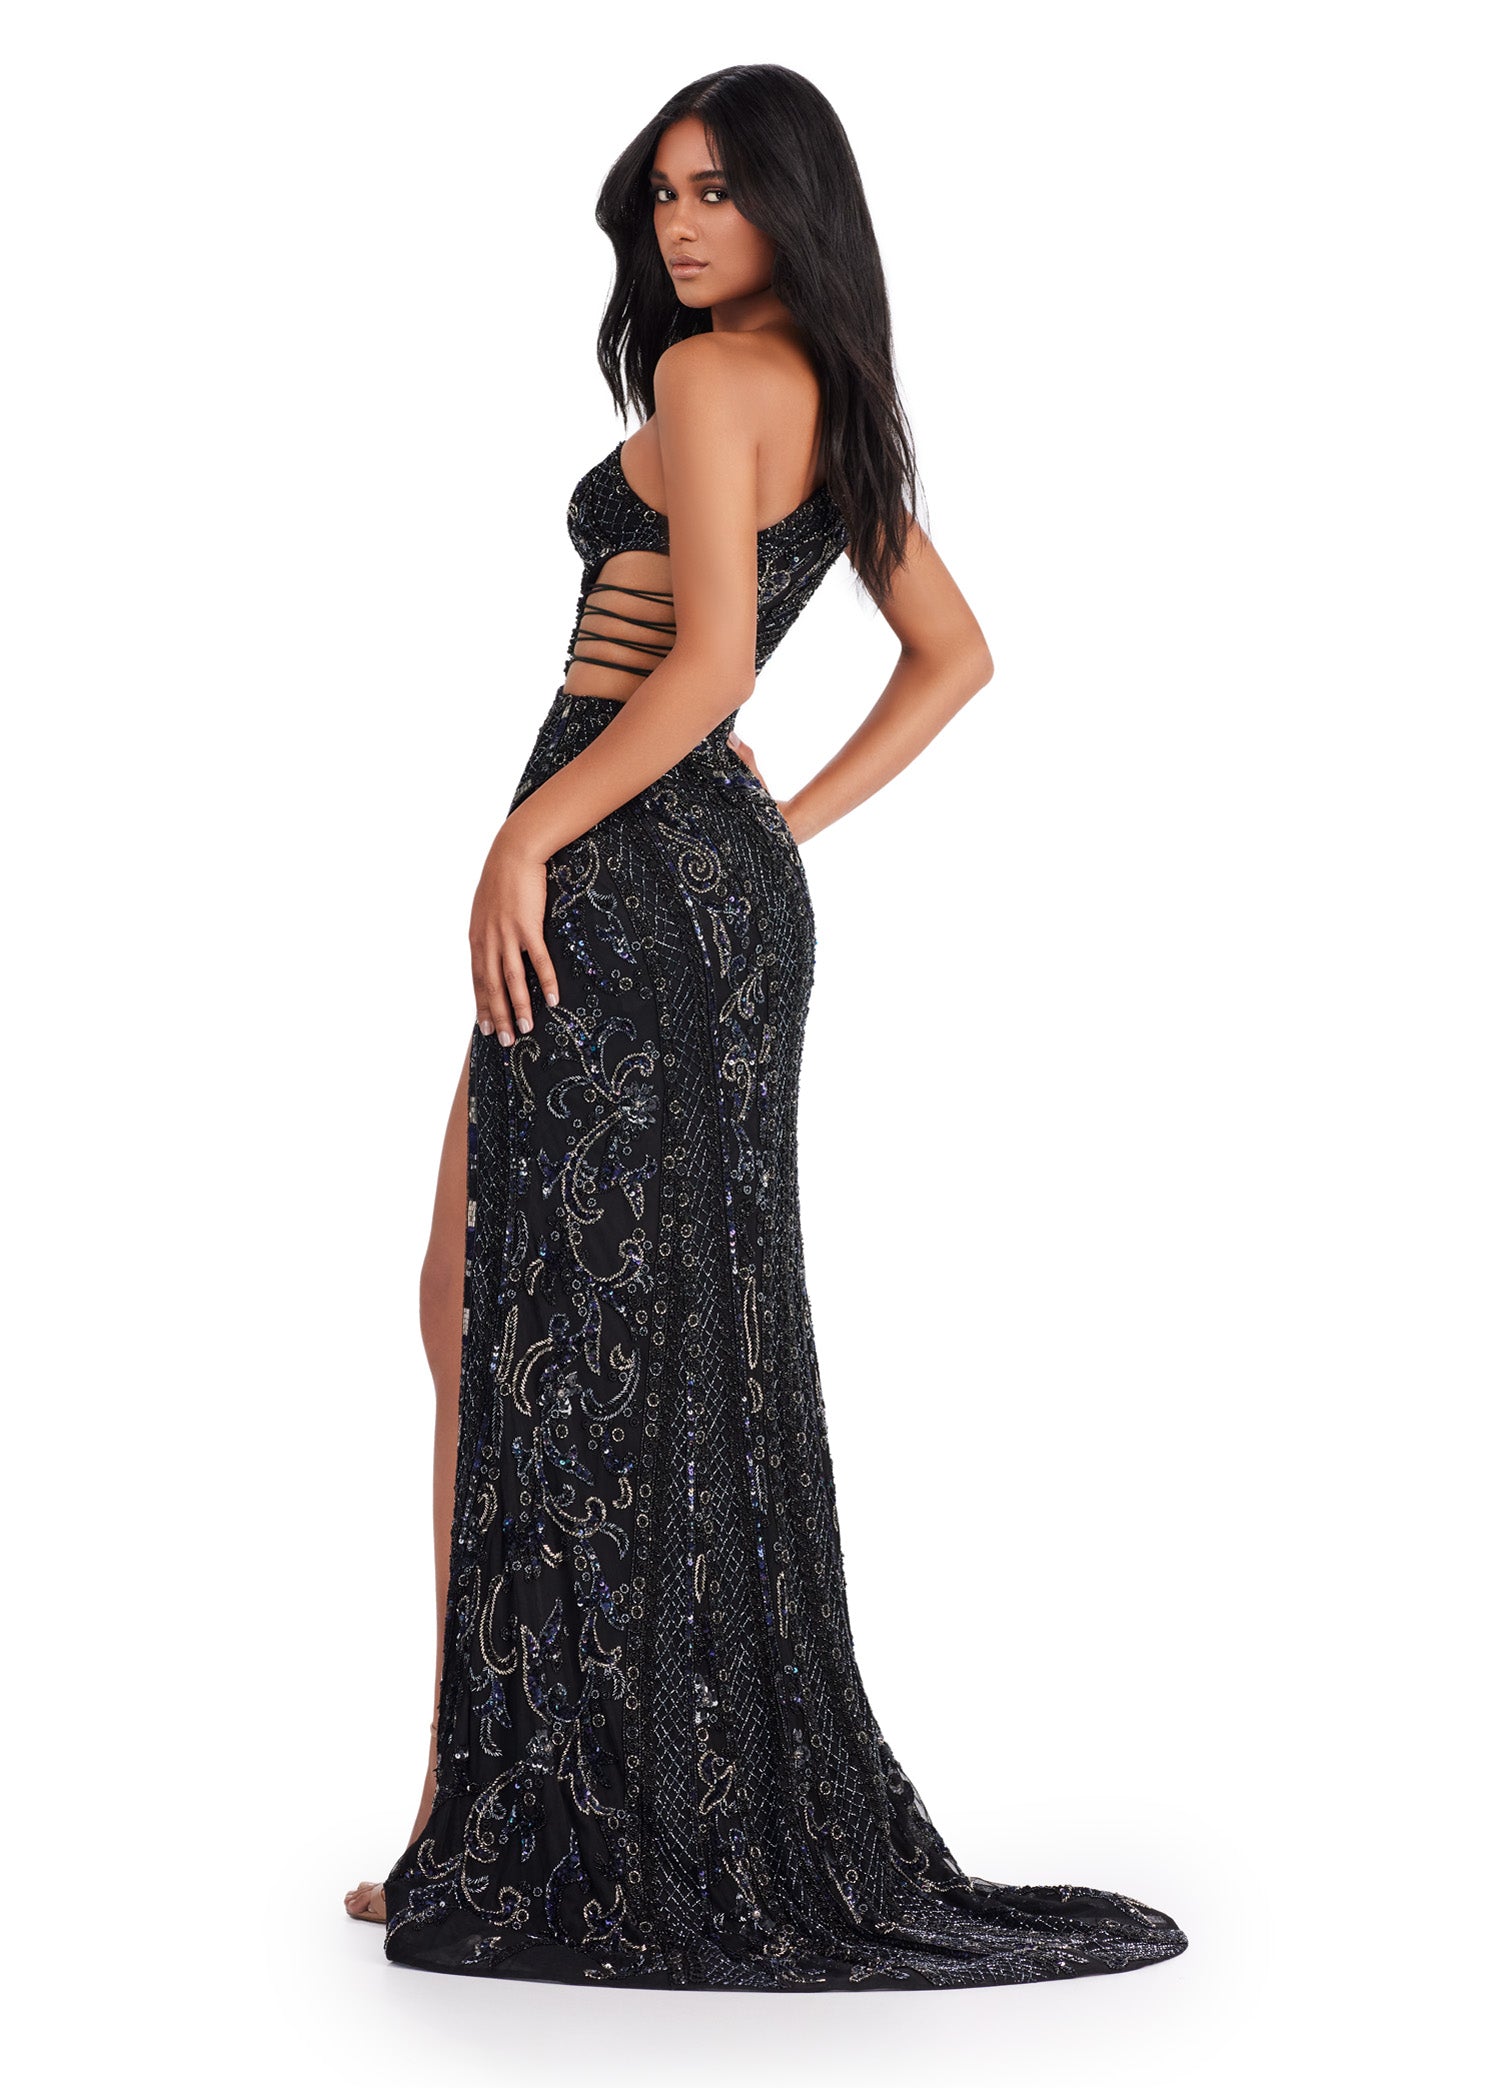 Expertly crafted for a stunning silhouette, the Ashley Lauren 11489 Long Prom Dress features a fitted one shoulder design with intricate sequin detailing. With stylish cut outs and a subtle slit, this formal pageant gown exudes elegance and sophistication. Perfect for making a statement at any special occasion. Wow the crowd in this fabulous fully beaded one shoulder gown. This dress features an intricate beaded design and asymmetric cut outs through out the bustier.